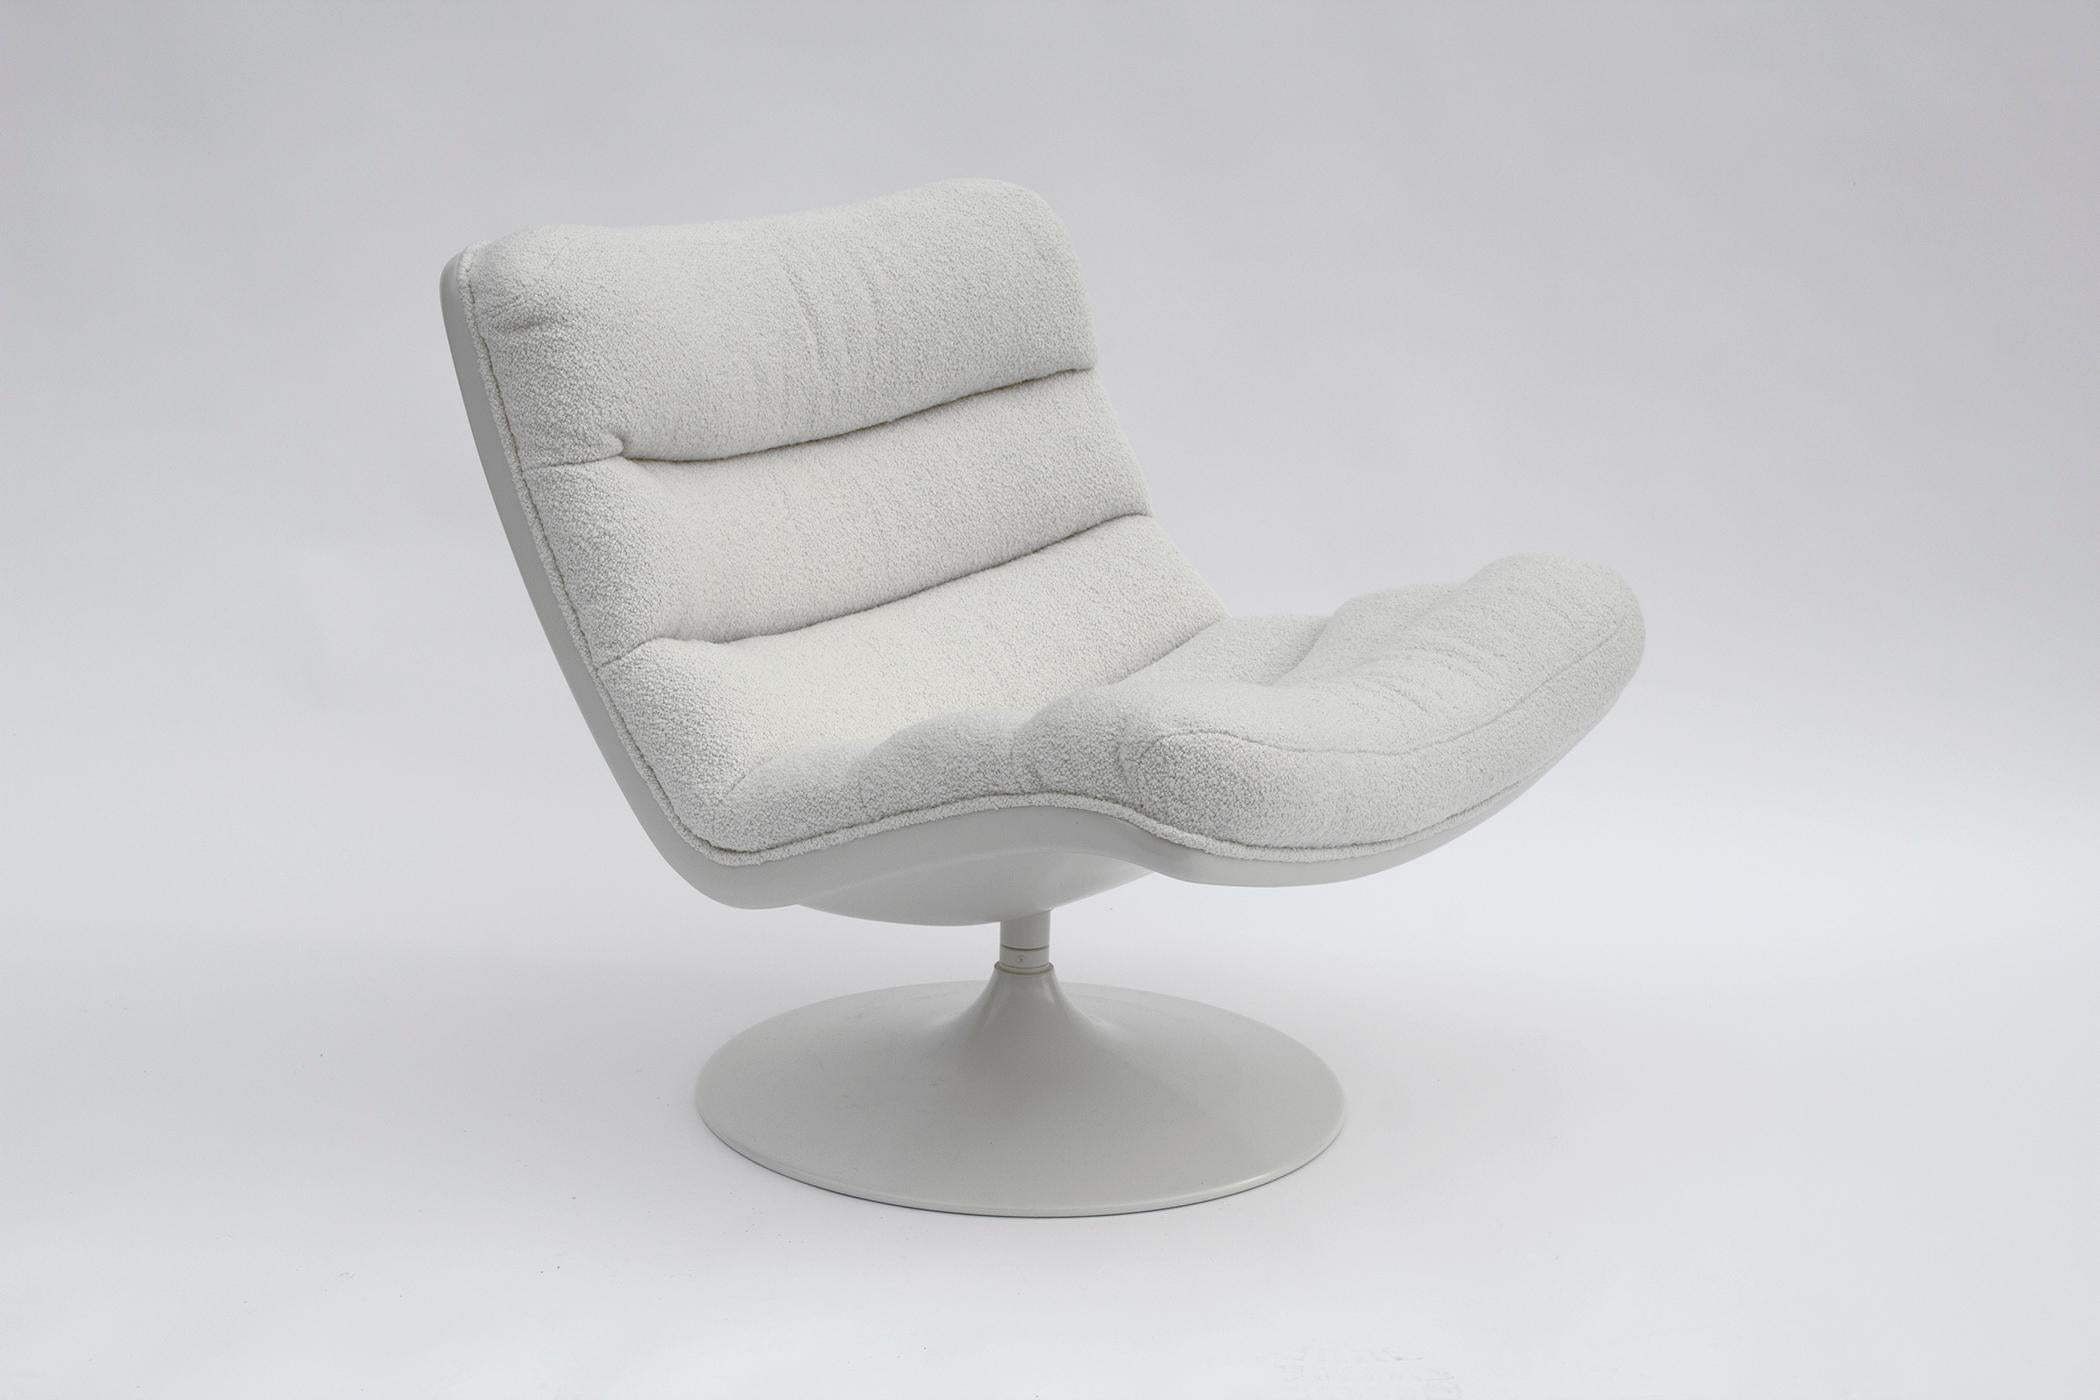 Lounge chair model F978 designed by Geoffrey Harcourt for Artifort, 1968. The lounge chair is early production, has the optional swivel base and has been completely restored with new foam, lacquer with a new beautiful boucle upholstery. Excellent